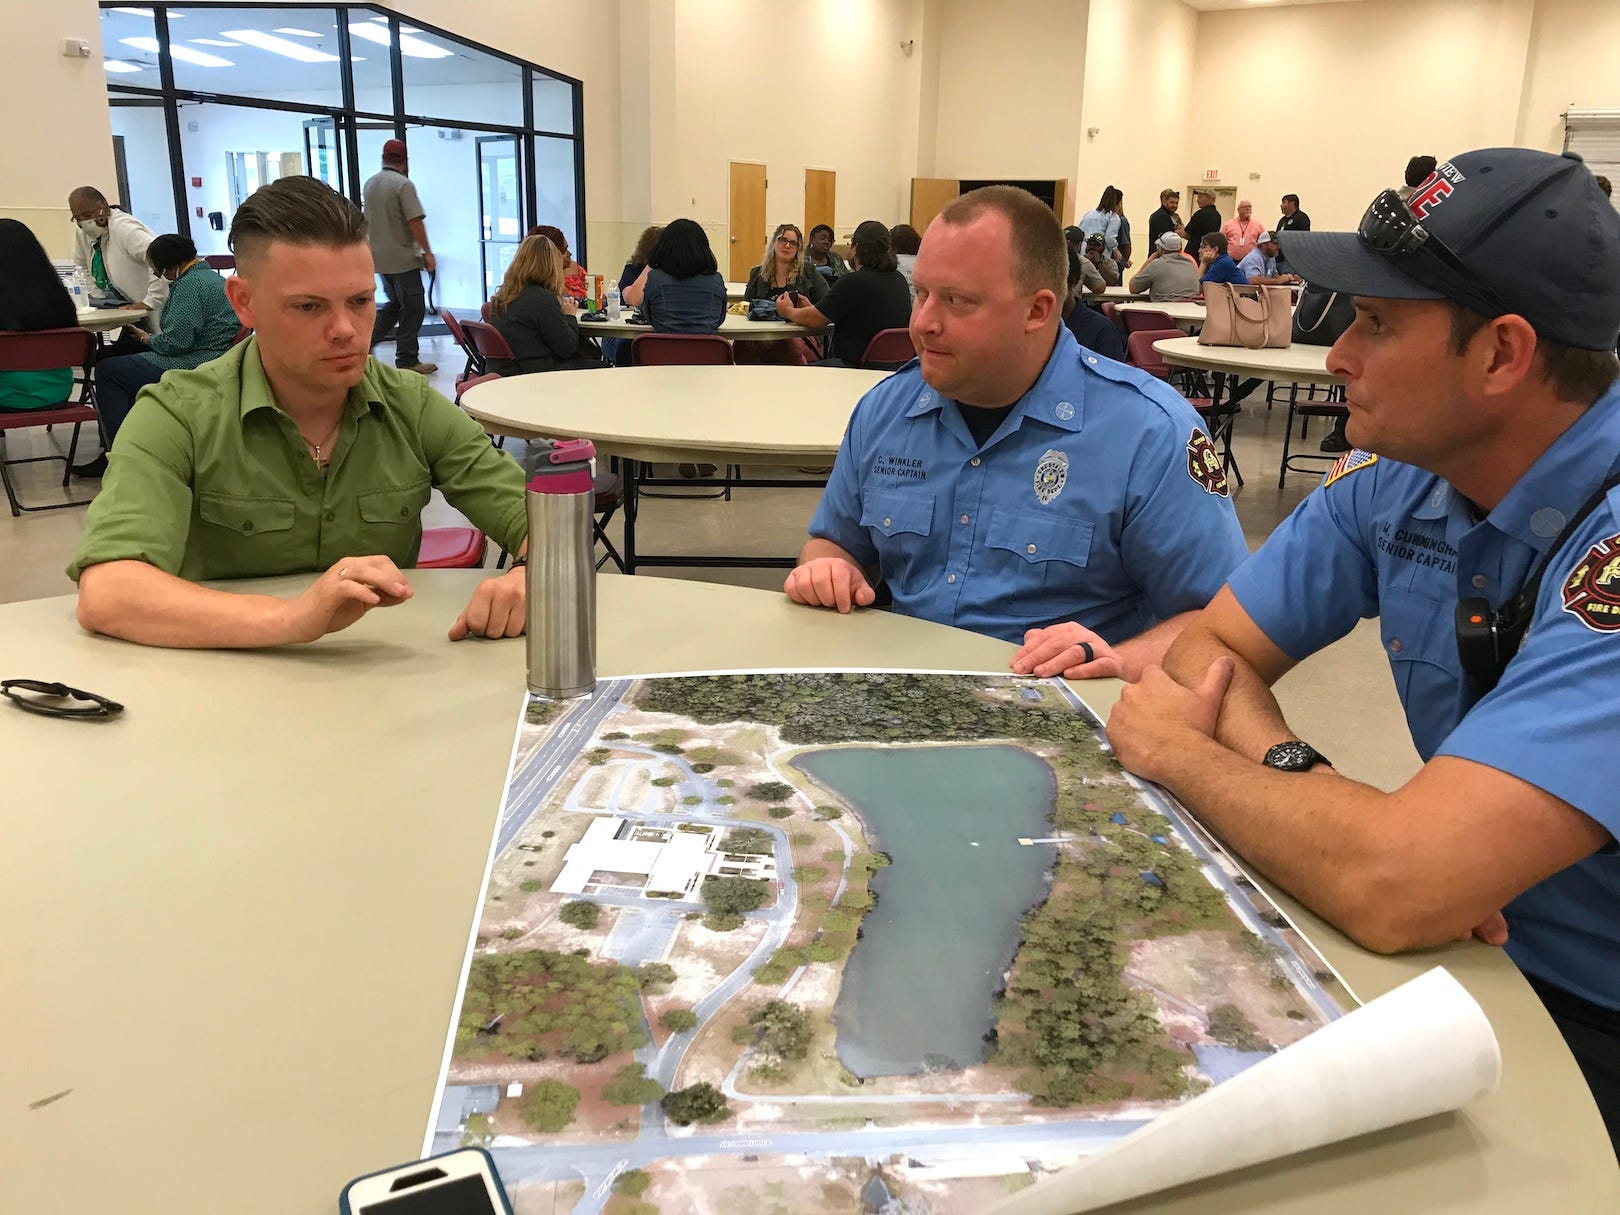 Dako Morfey, an adviser for Crestview’s April 2022 World War II “Hail Our Heroes” weekend, discusses Twin Hills Park fire and pyrotechnic safety precautions for the weekend’s reenactments with Crestview Fire Department Captains Corey Winkler and Matt Cunningham.